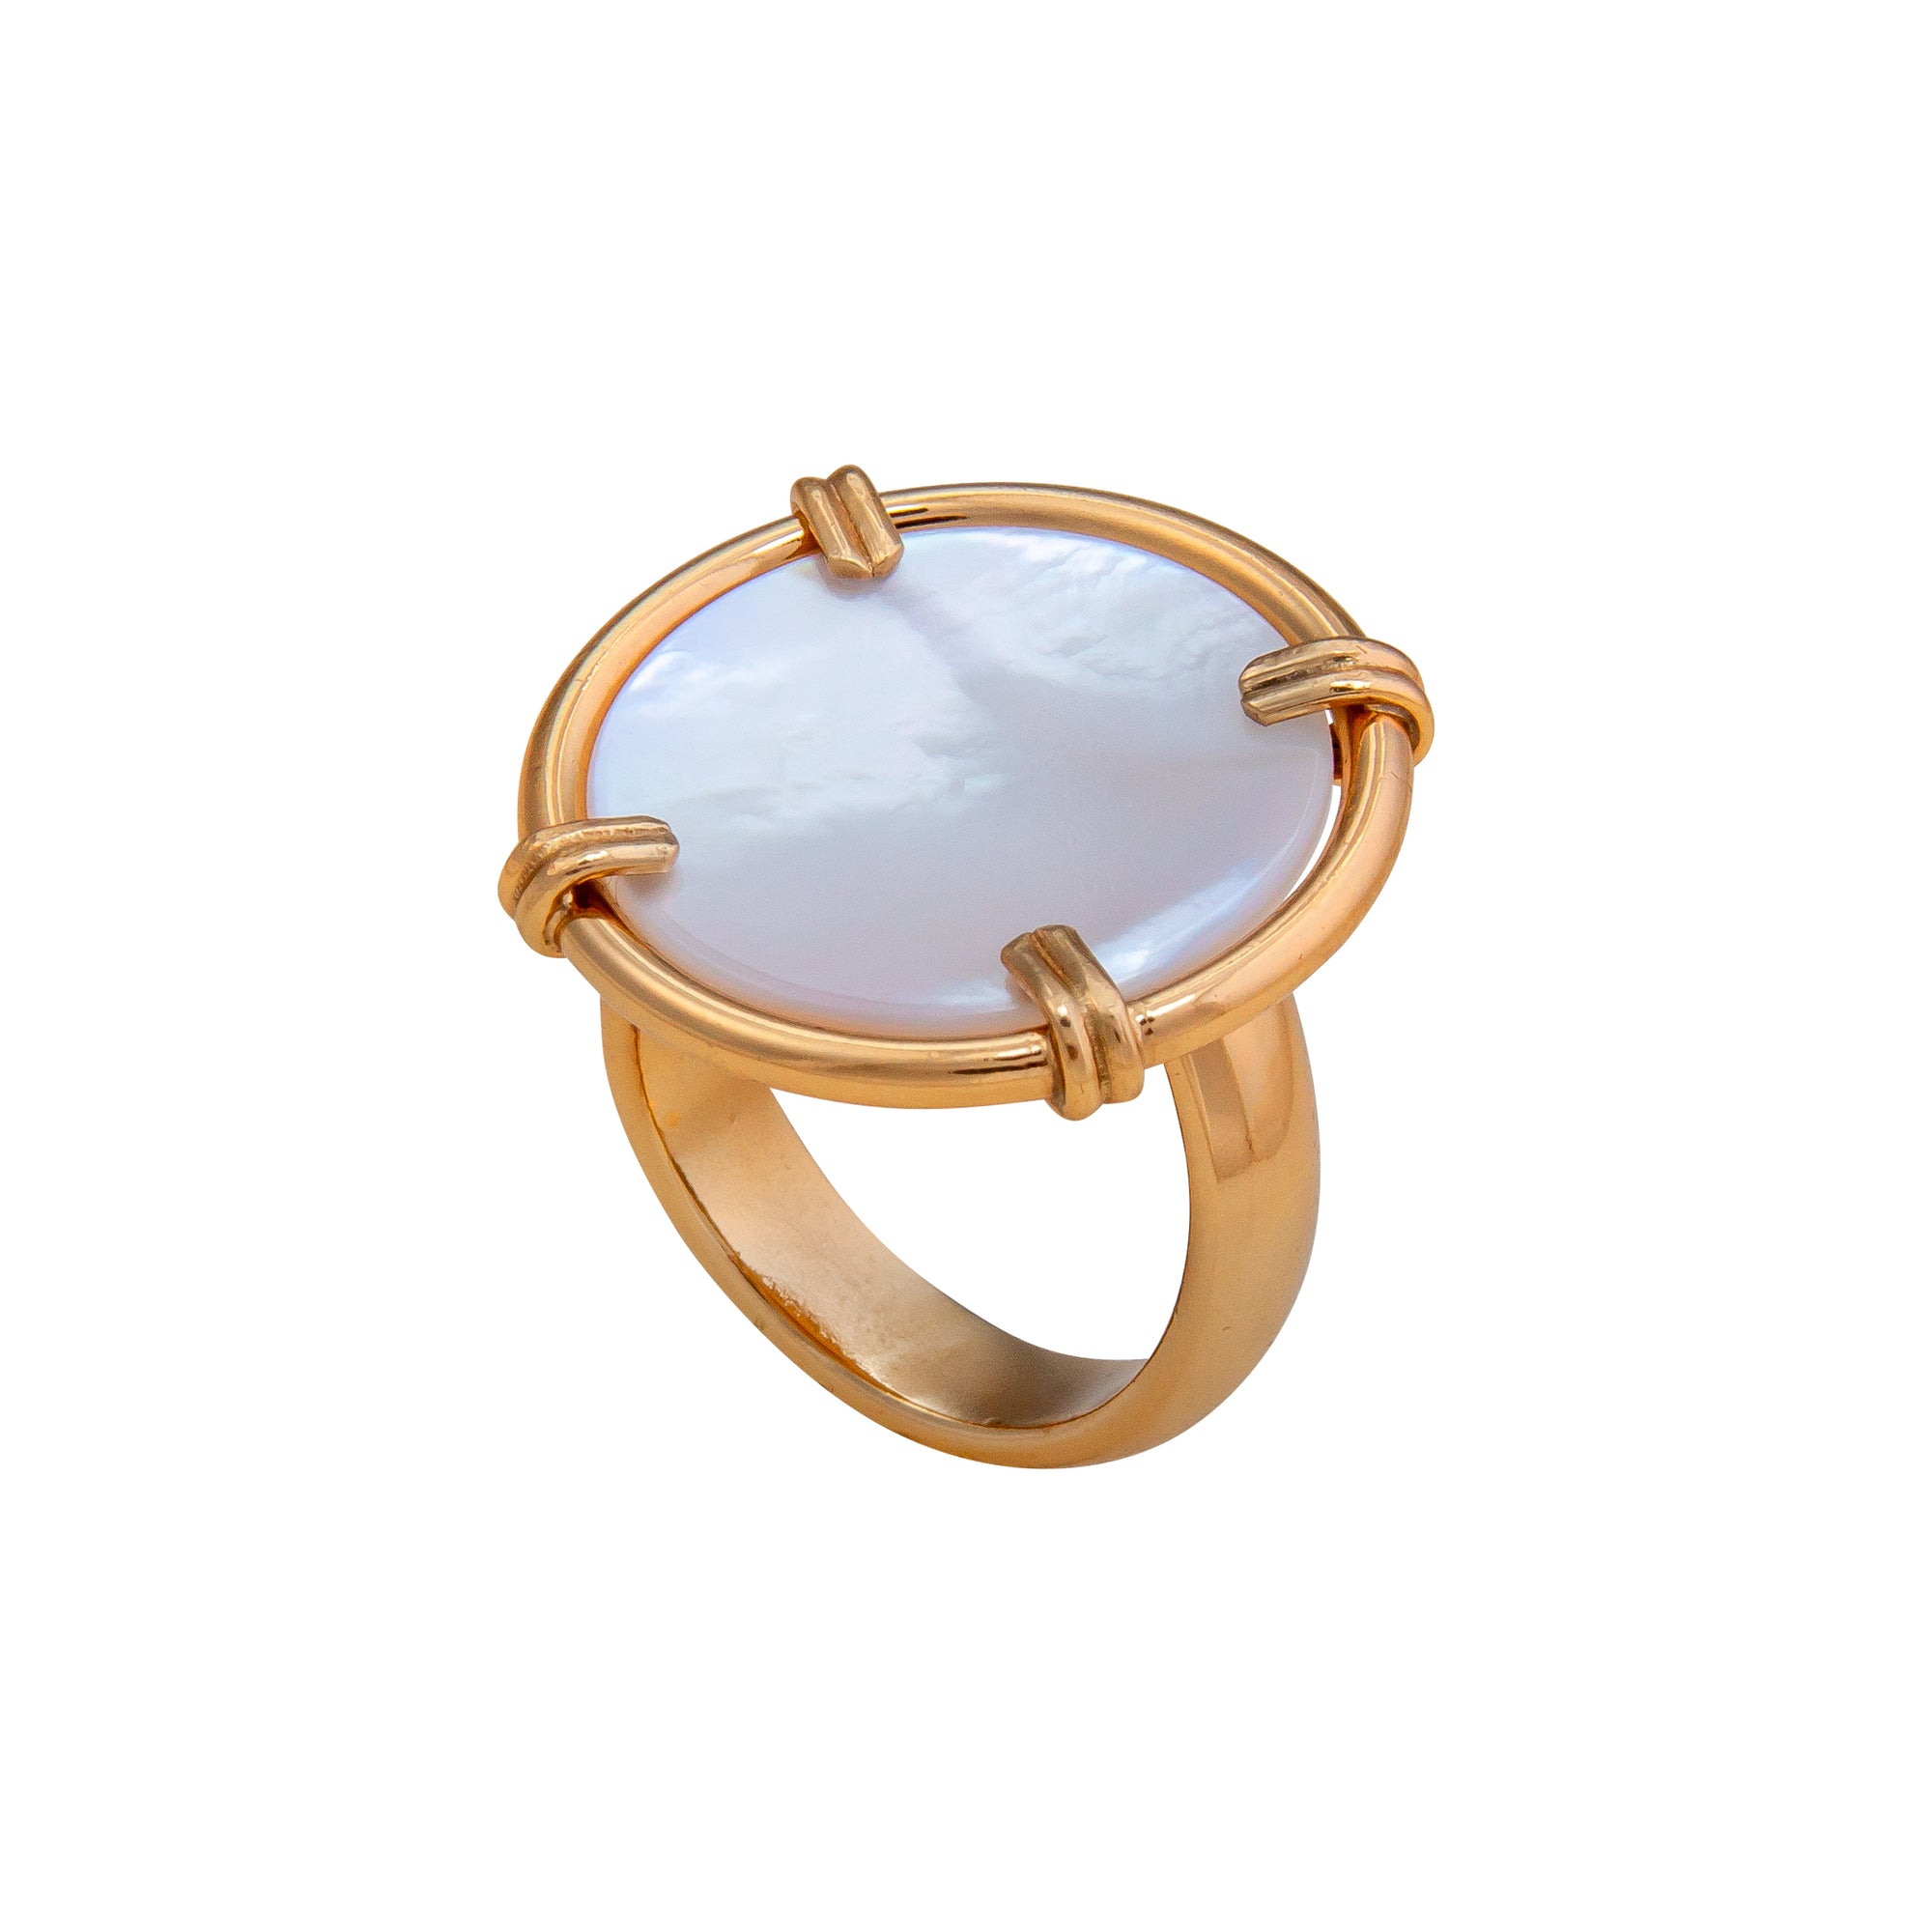 Alchemia Mother of Pearl Prong Adjustable Ring - Large | Charles Albert Jewelry